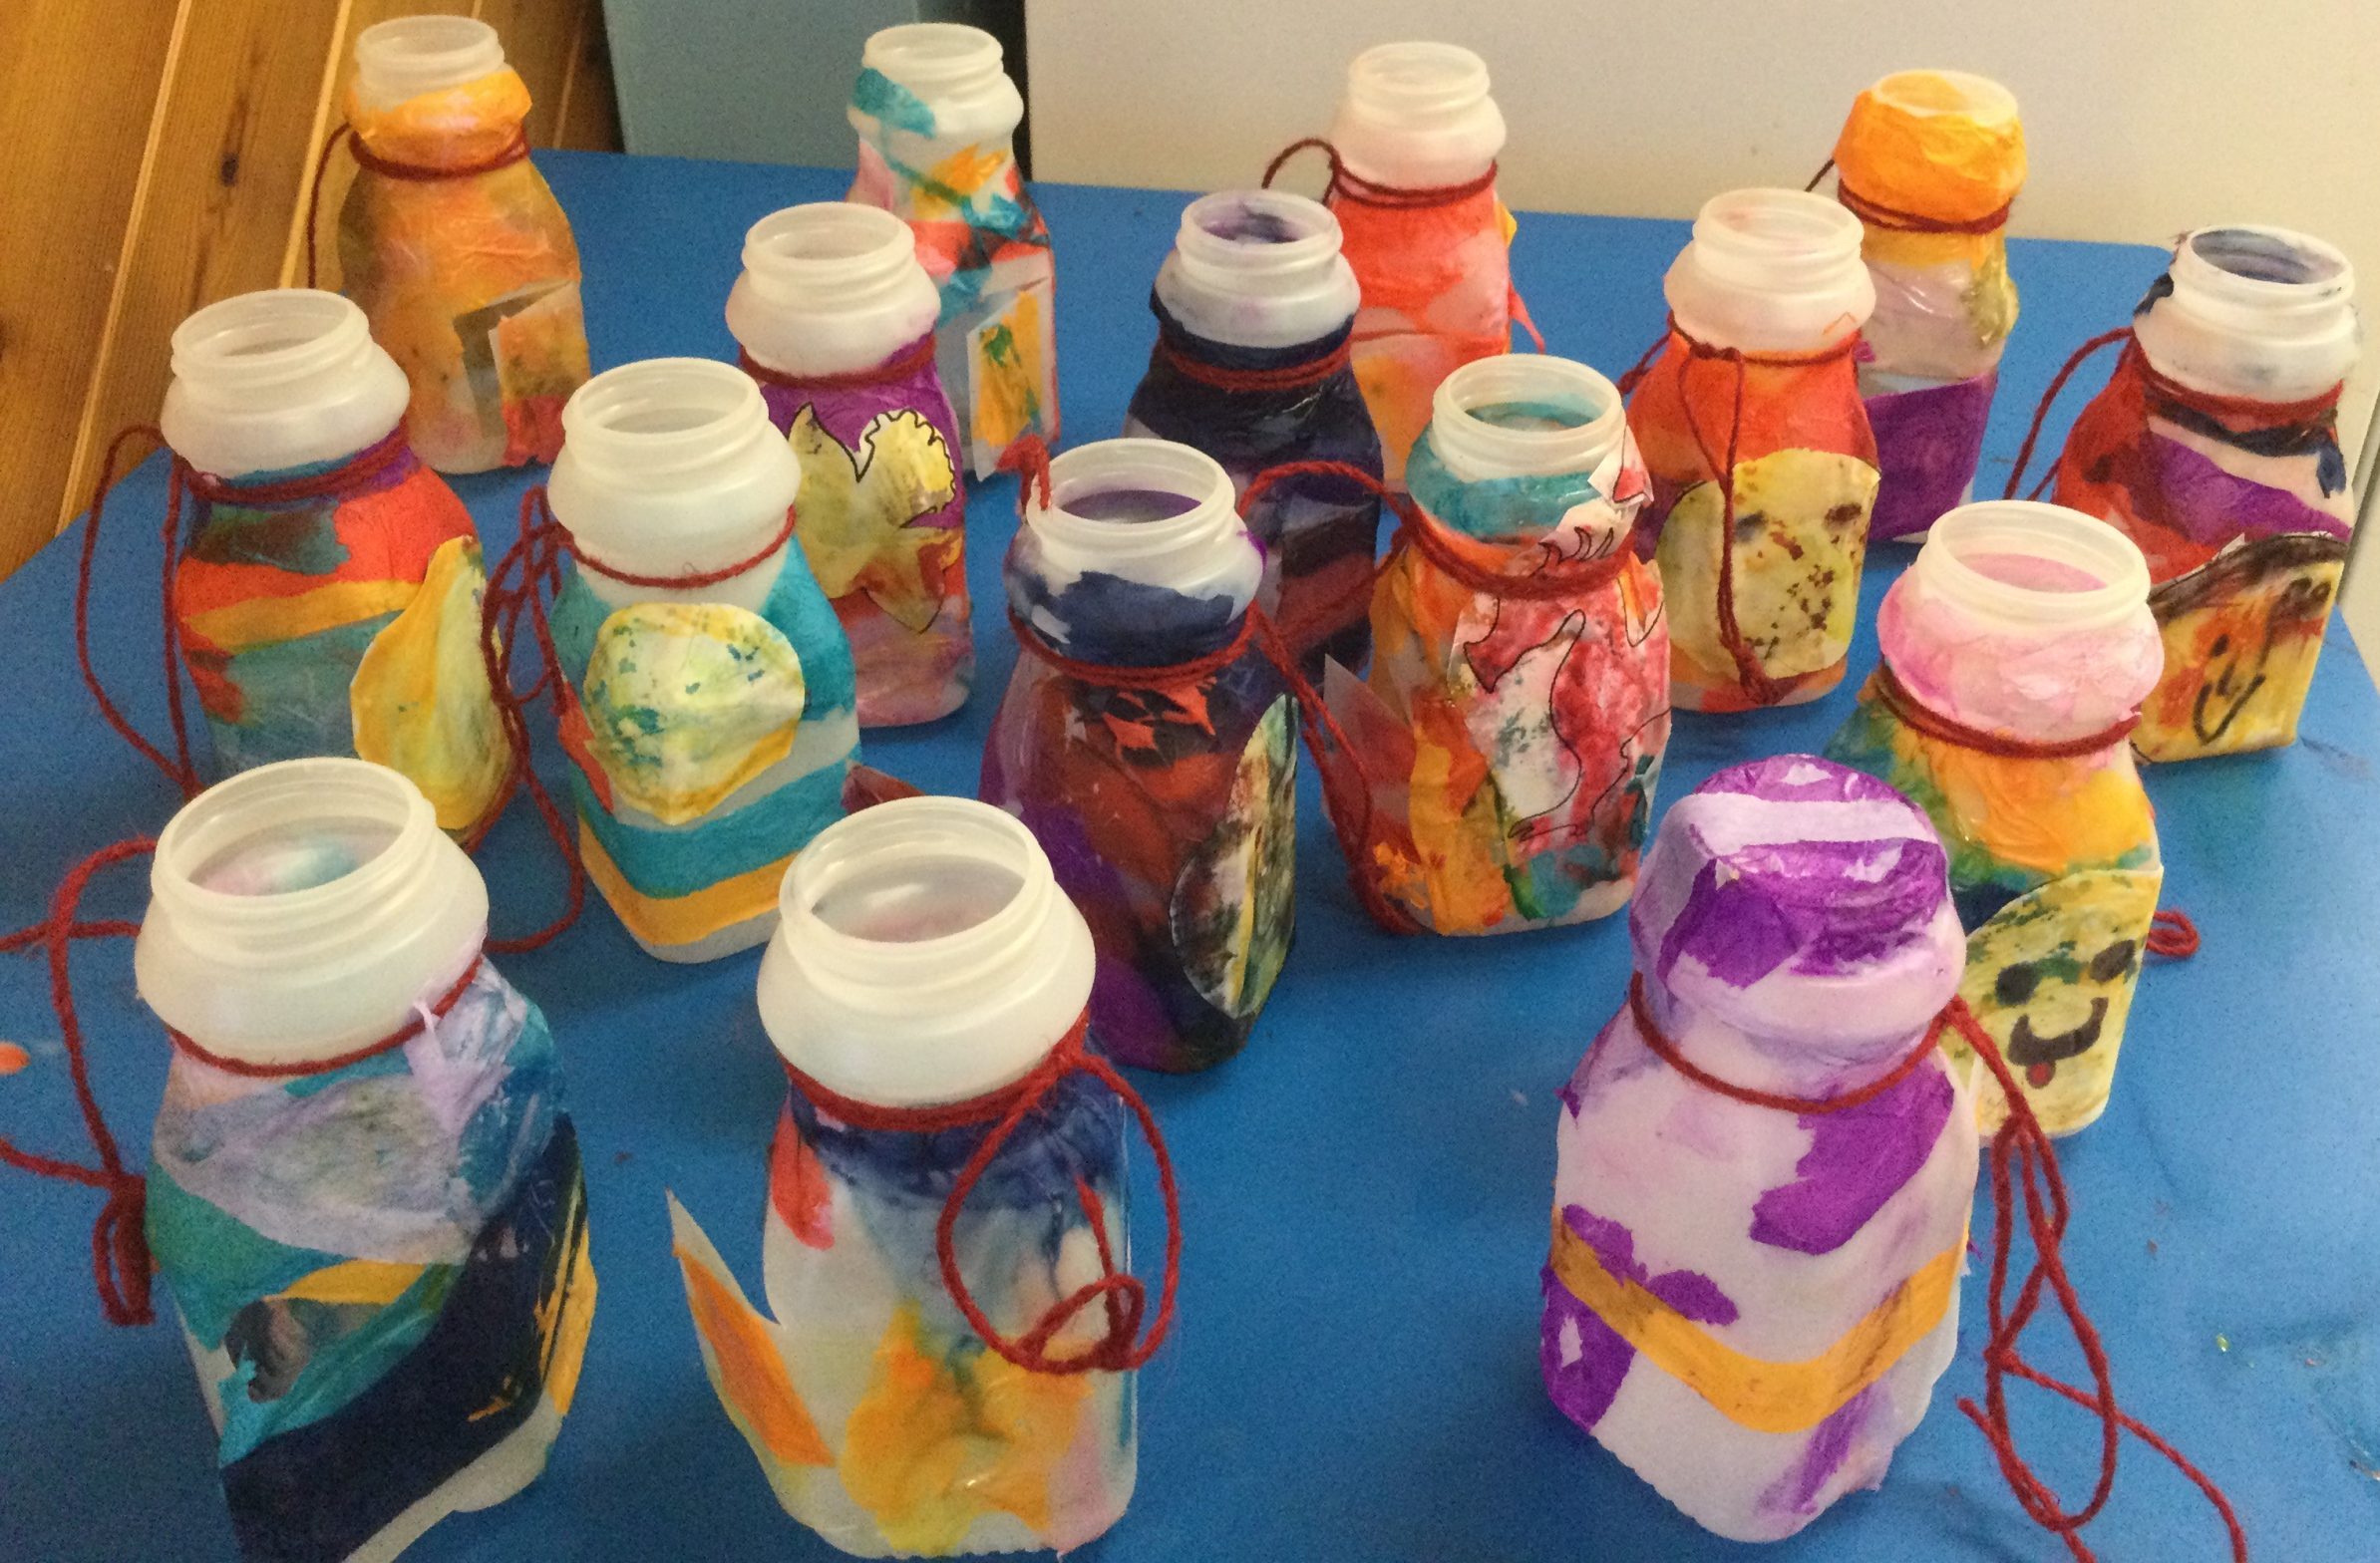 A selection of plastic bottles that have been decorated with colourful tissue paper and string to create lanterns.